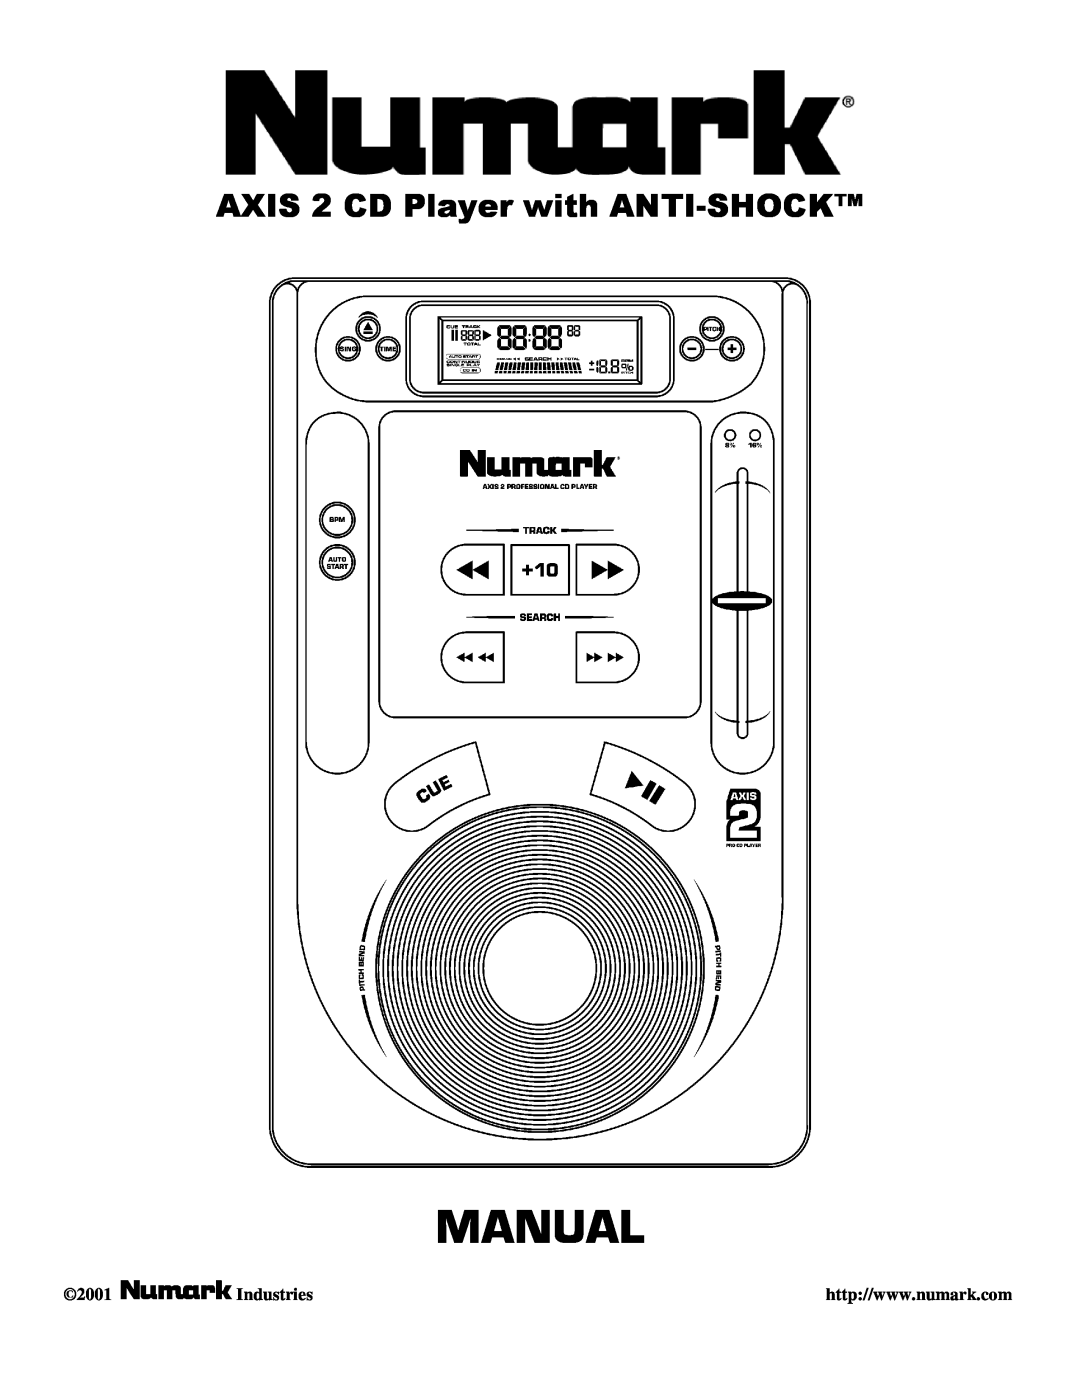 Numark Industries AXIS 9 manual Manual, AXIS 2 CD Player with ANTI-SHOCK, Industries, 2001 